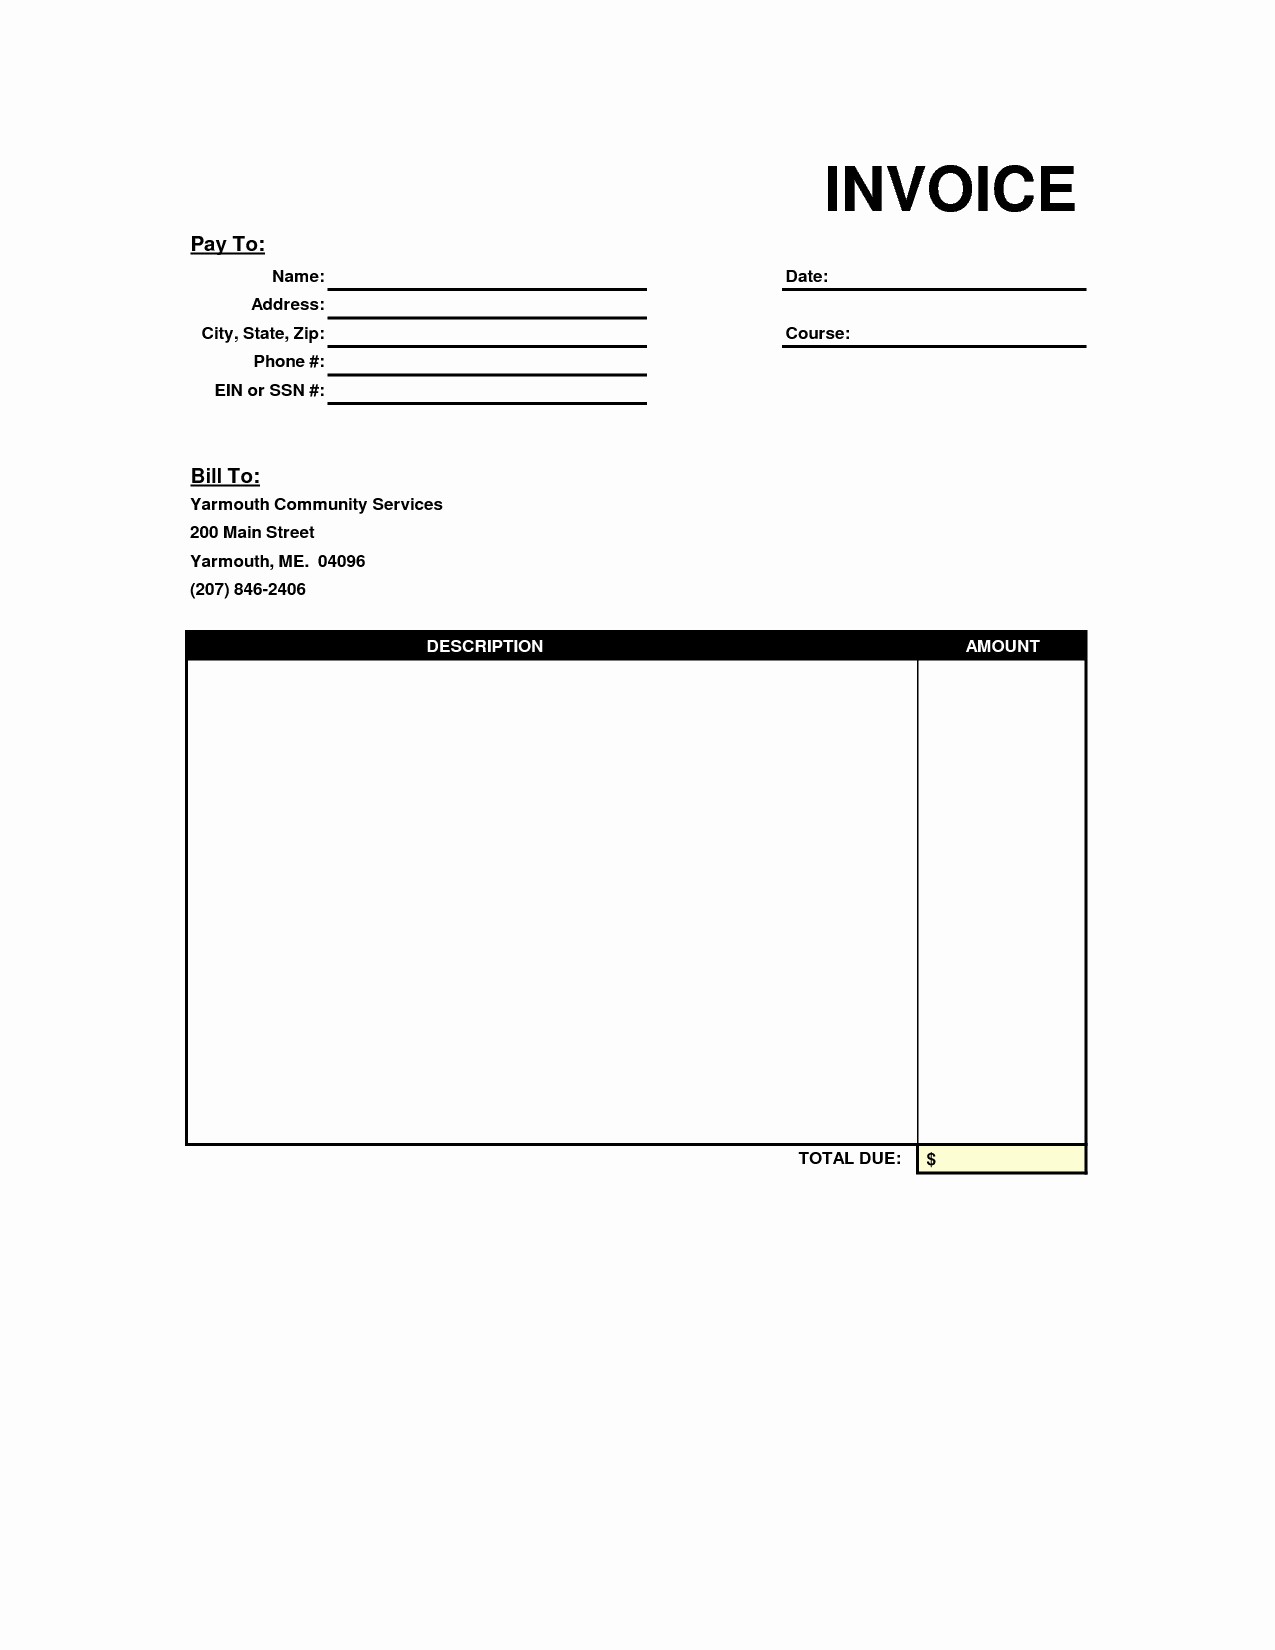 Copy Of A Blank Invoice Fresh Blank Invoice Template Uk Templates Resume Examples